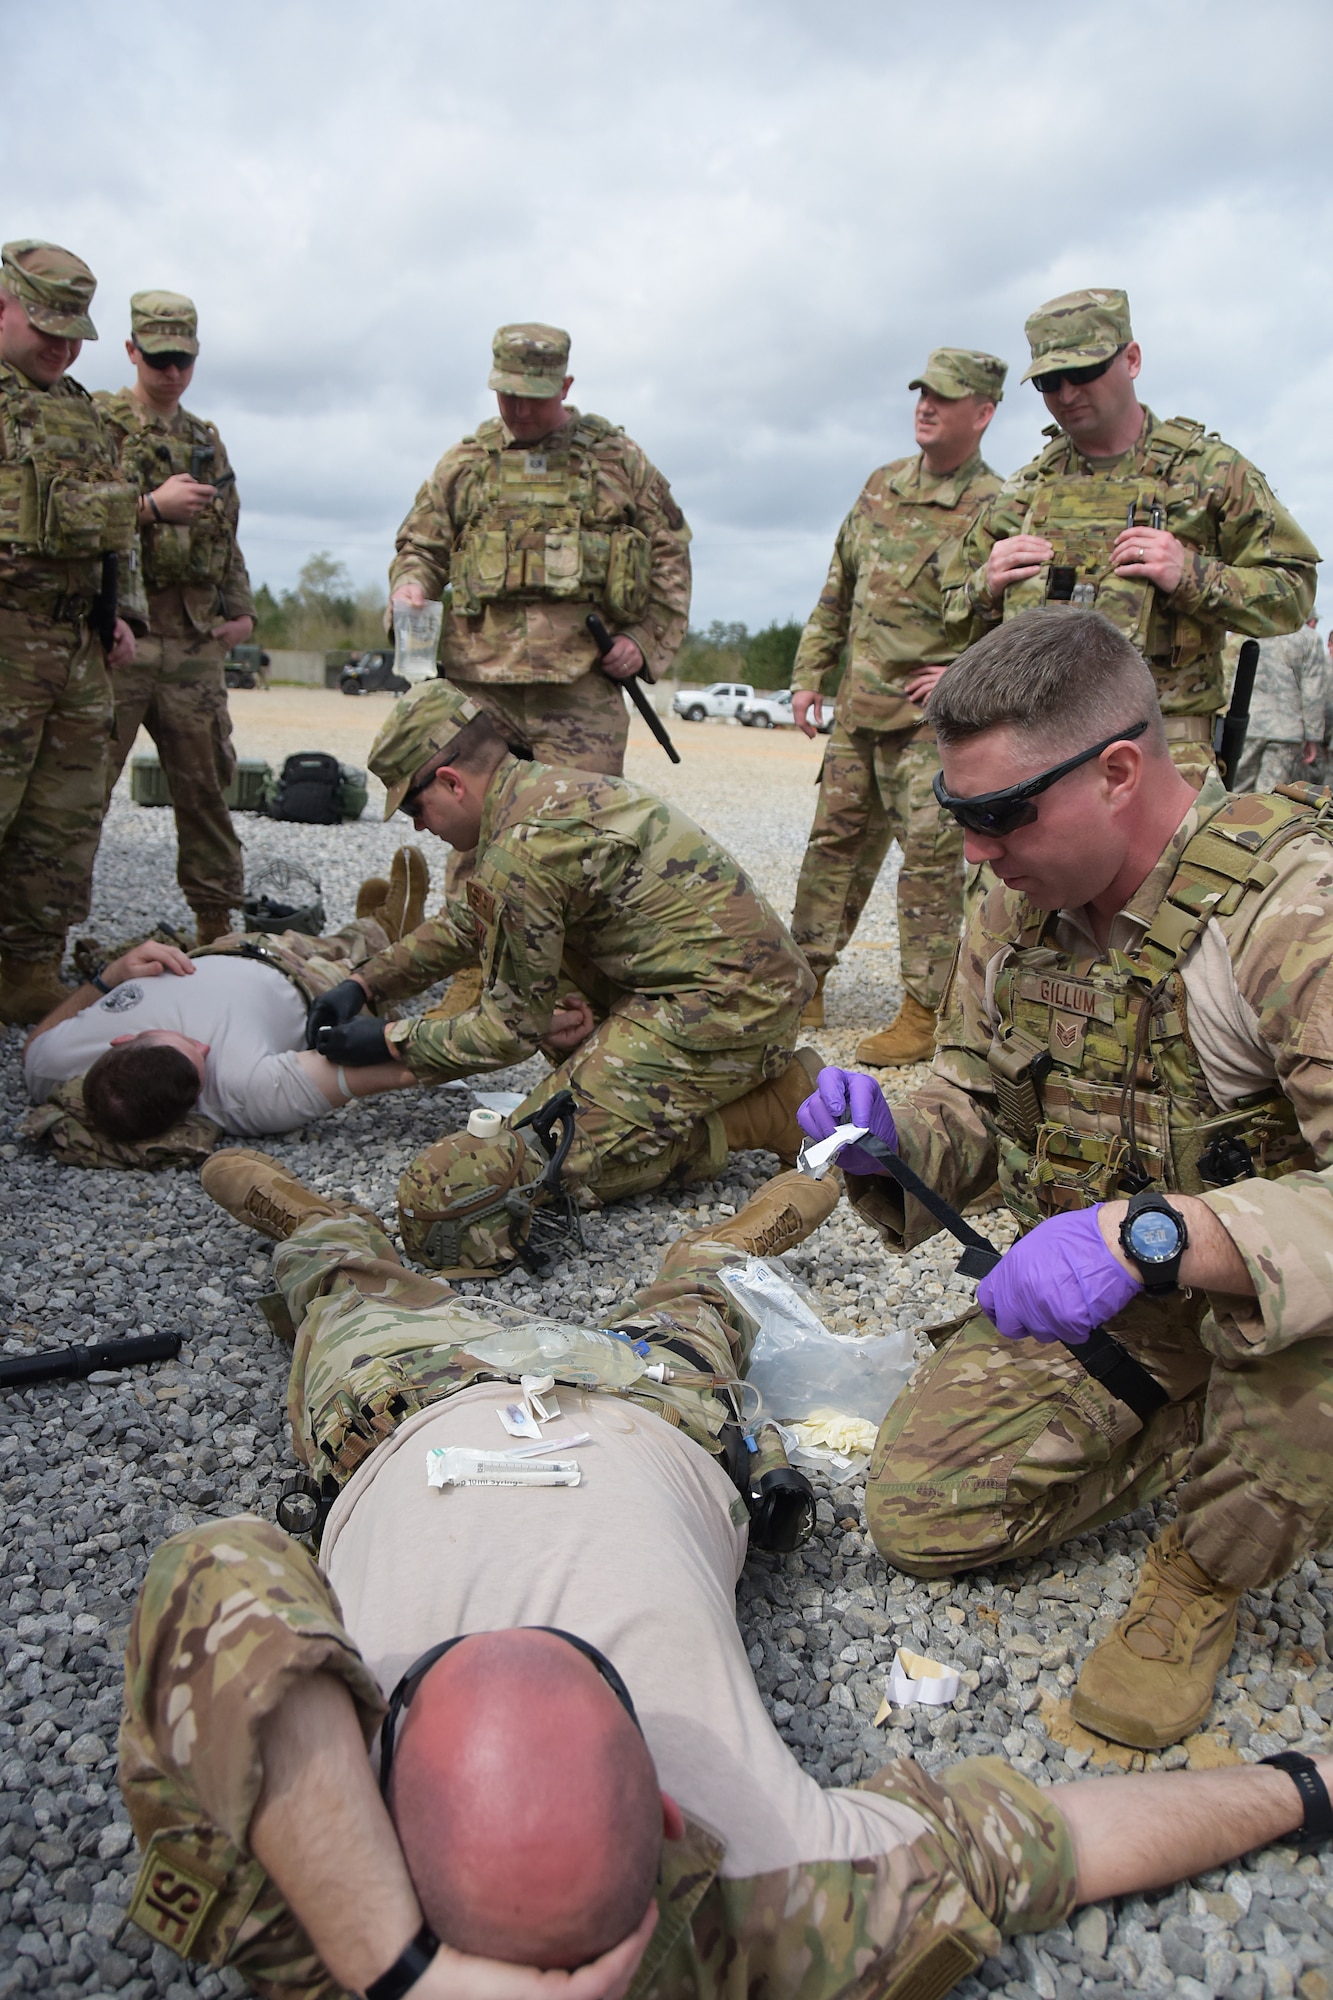 Ohio Air National Guard Airmen participate in medical readiness training during Patriot South, a domestic operations exercise at Camp Shelby, Mississippi, March 2, 2020. The 178th SFS led a security execution with members from the 179th, 180th, and 121st, along with members from the Iowa and New Jersey Air National Guard in a support role to the Mississippi Department of Wildlife, Fisheries and Parks' Special Response Team. (U.S. Air National Guard photo by Capt. Lou Burton)